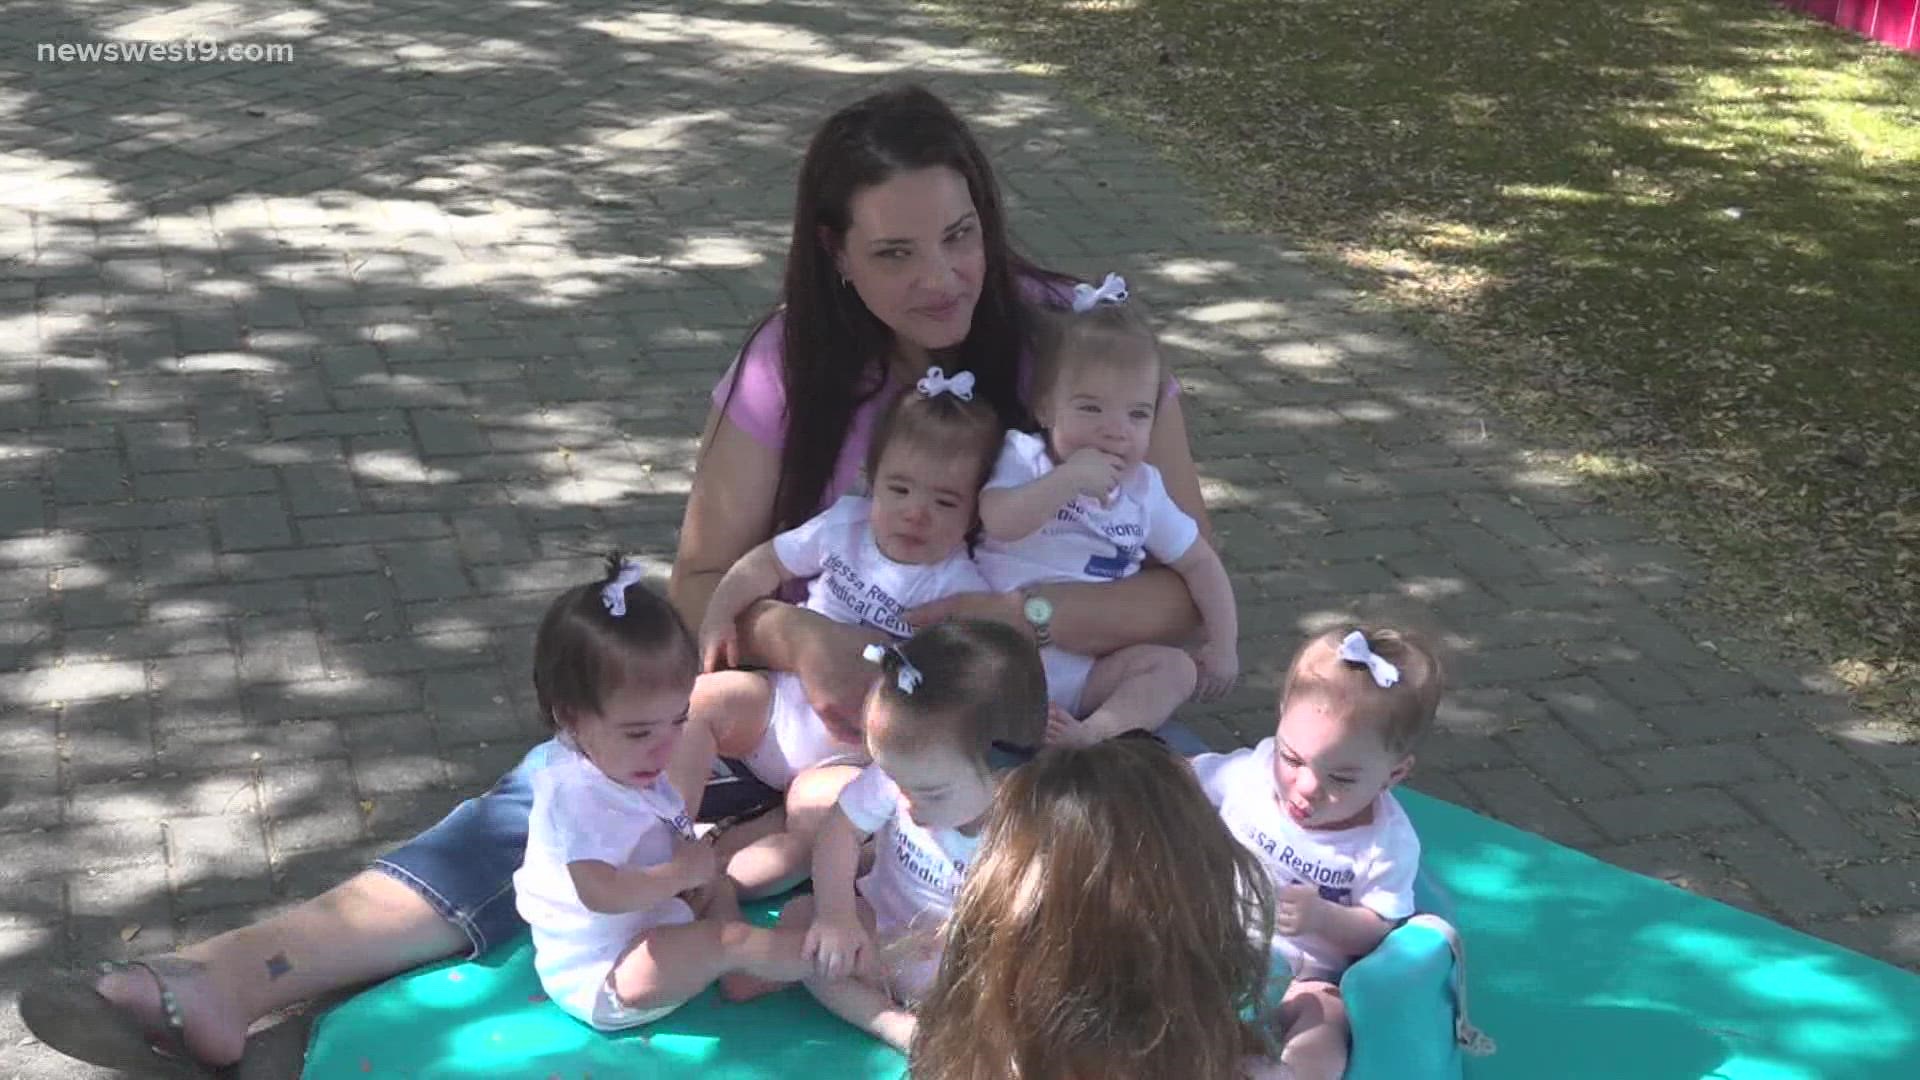 The rare quintuplets were born at Odessa Regional Medical Center in August of 2020.